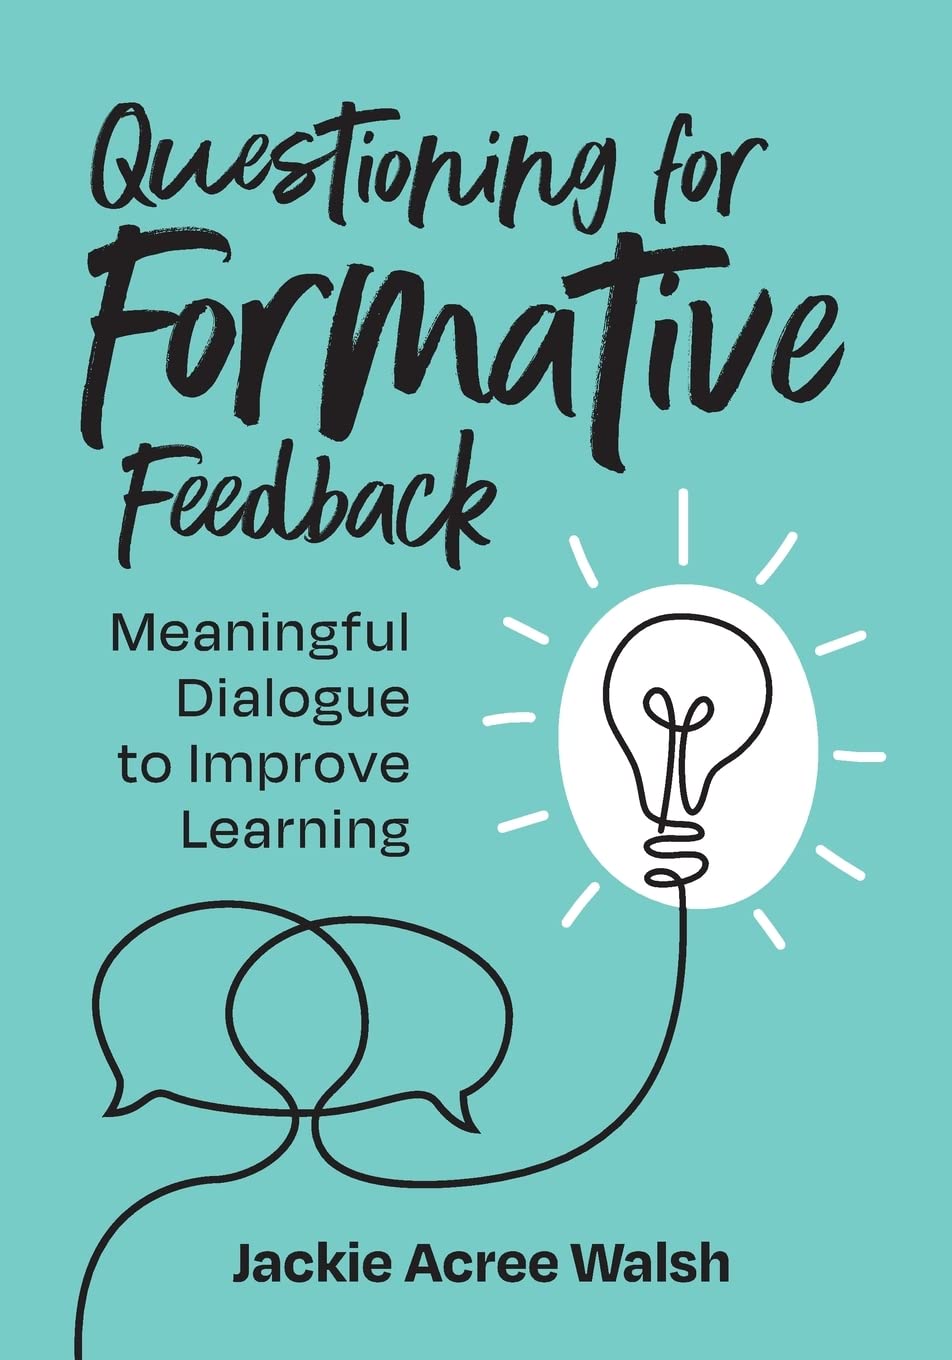 Questioning for formative feedback book image